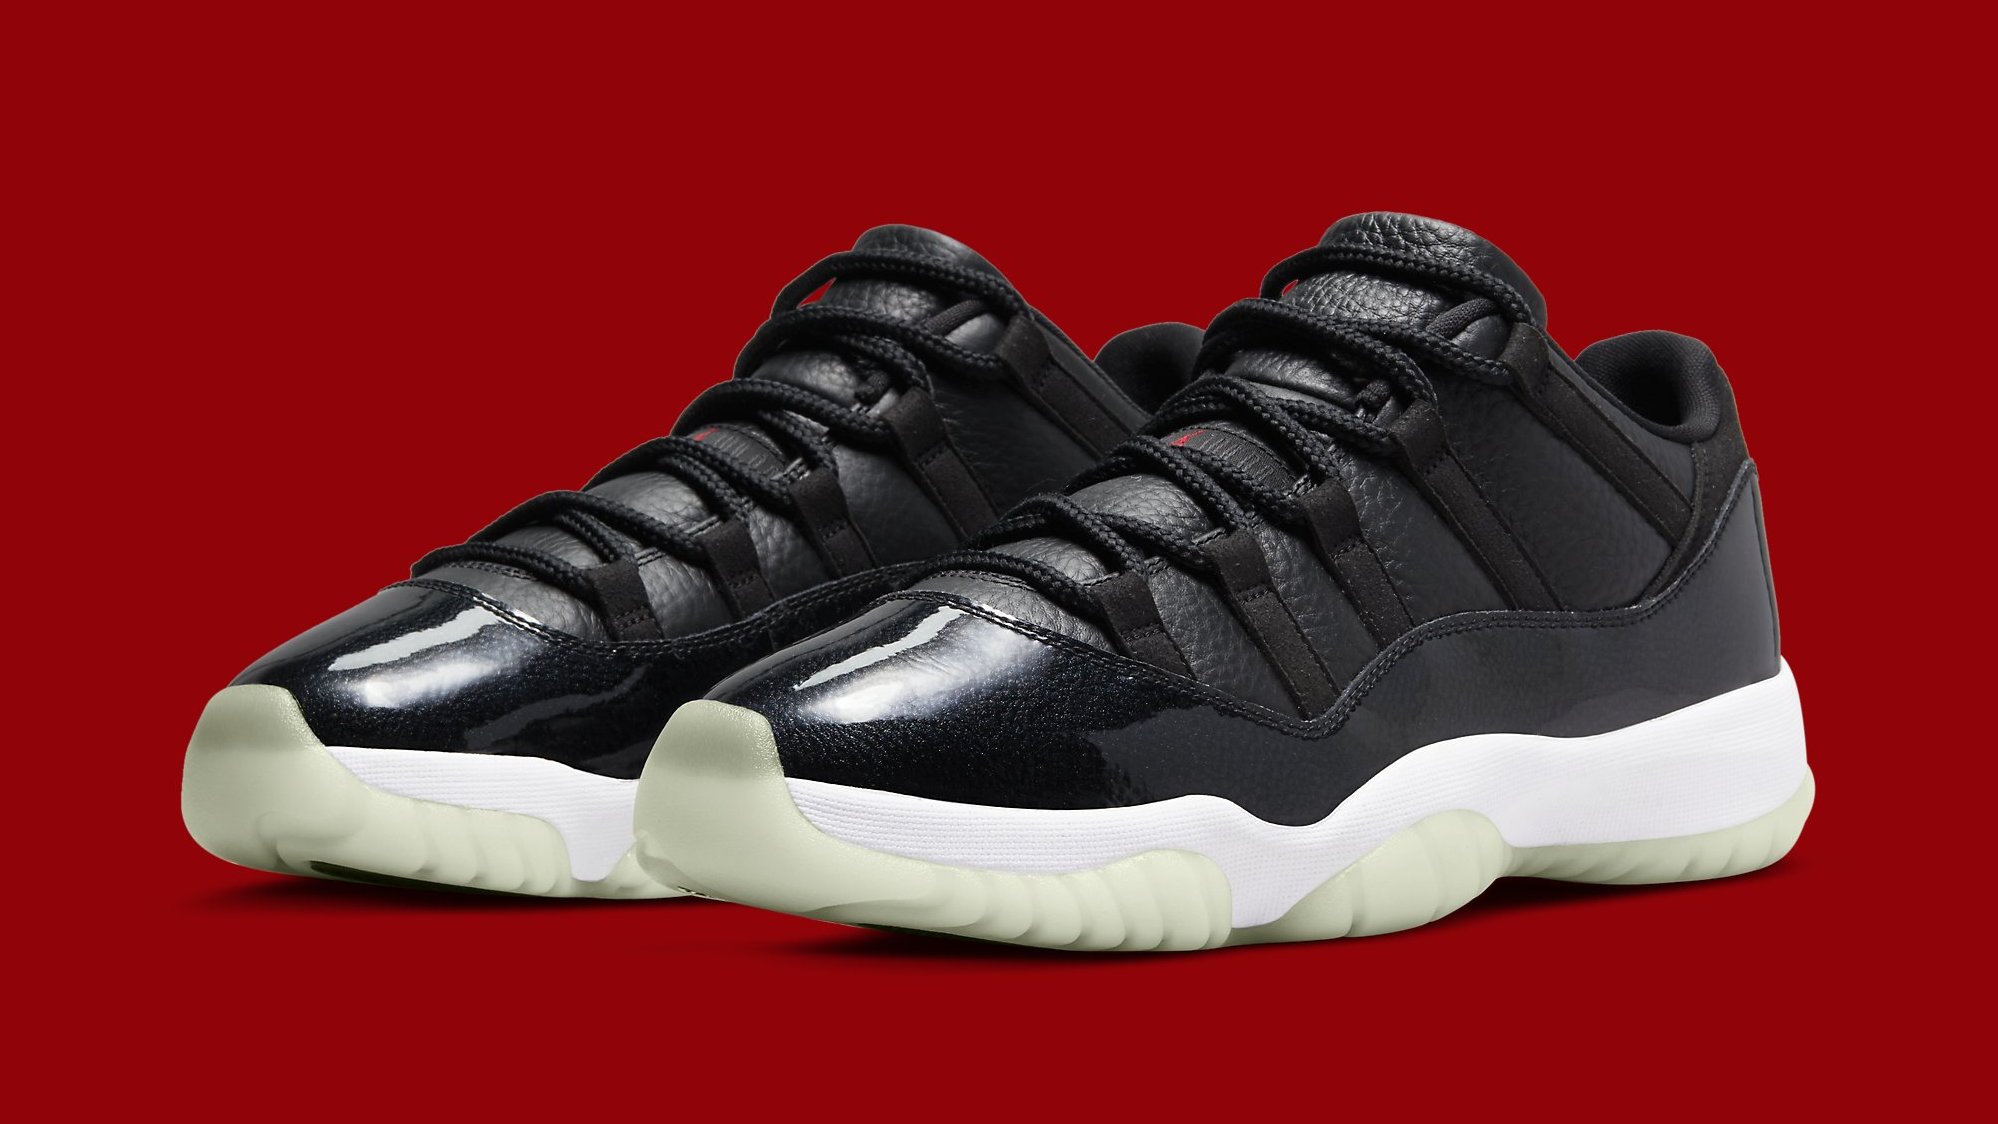 72-10' Air Jordan 11 Low Is Officially Releasing in May | Complex